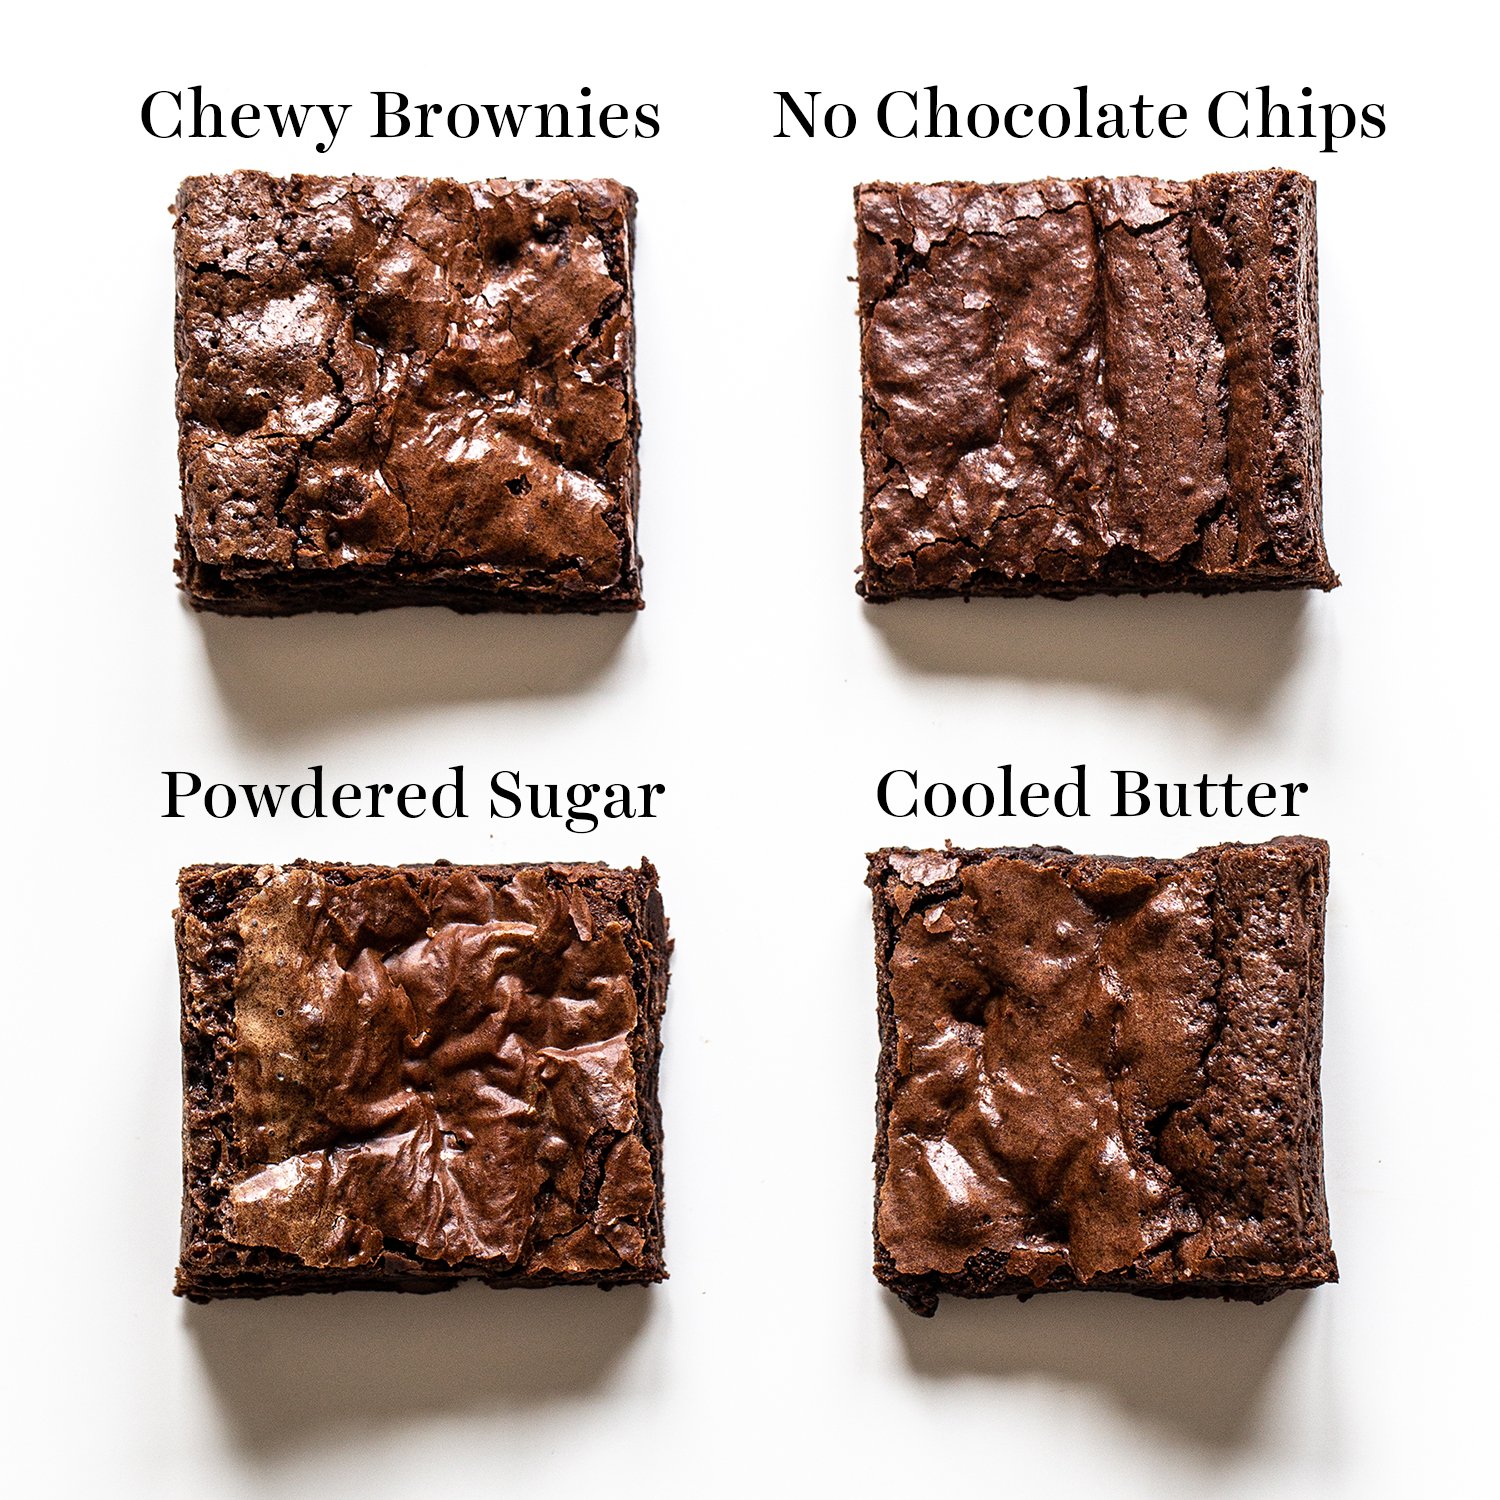 overhead photo of brownies, comparing no chocolate chip brownies, vs. powdered sugar brownies, vs cooled butter brownies